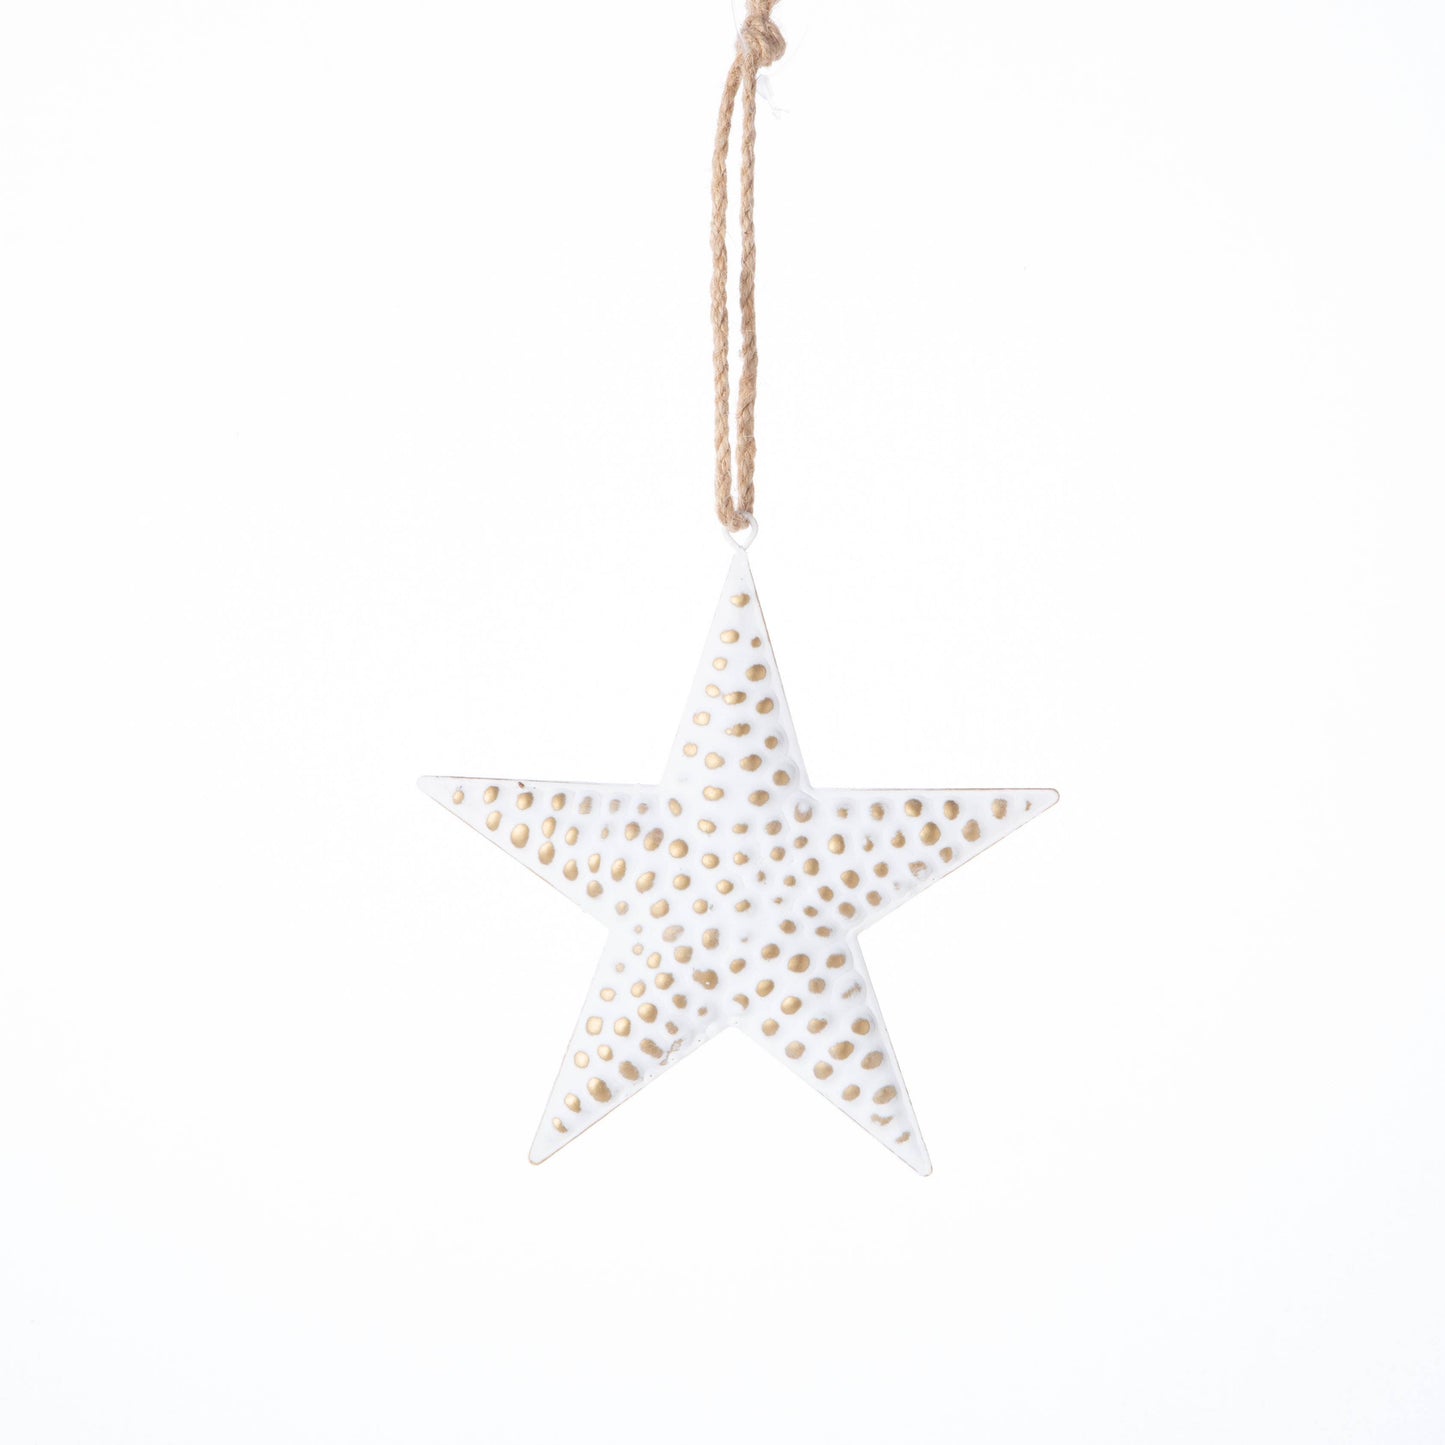 A21292 Embossed metal star orn,antique white,mini star p